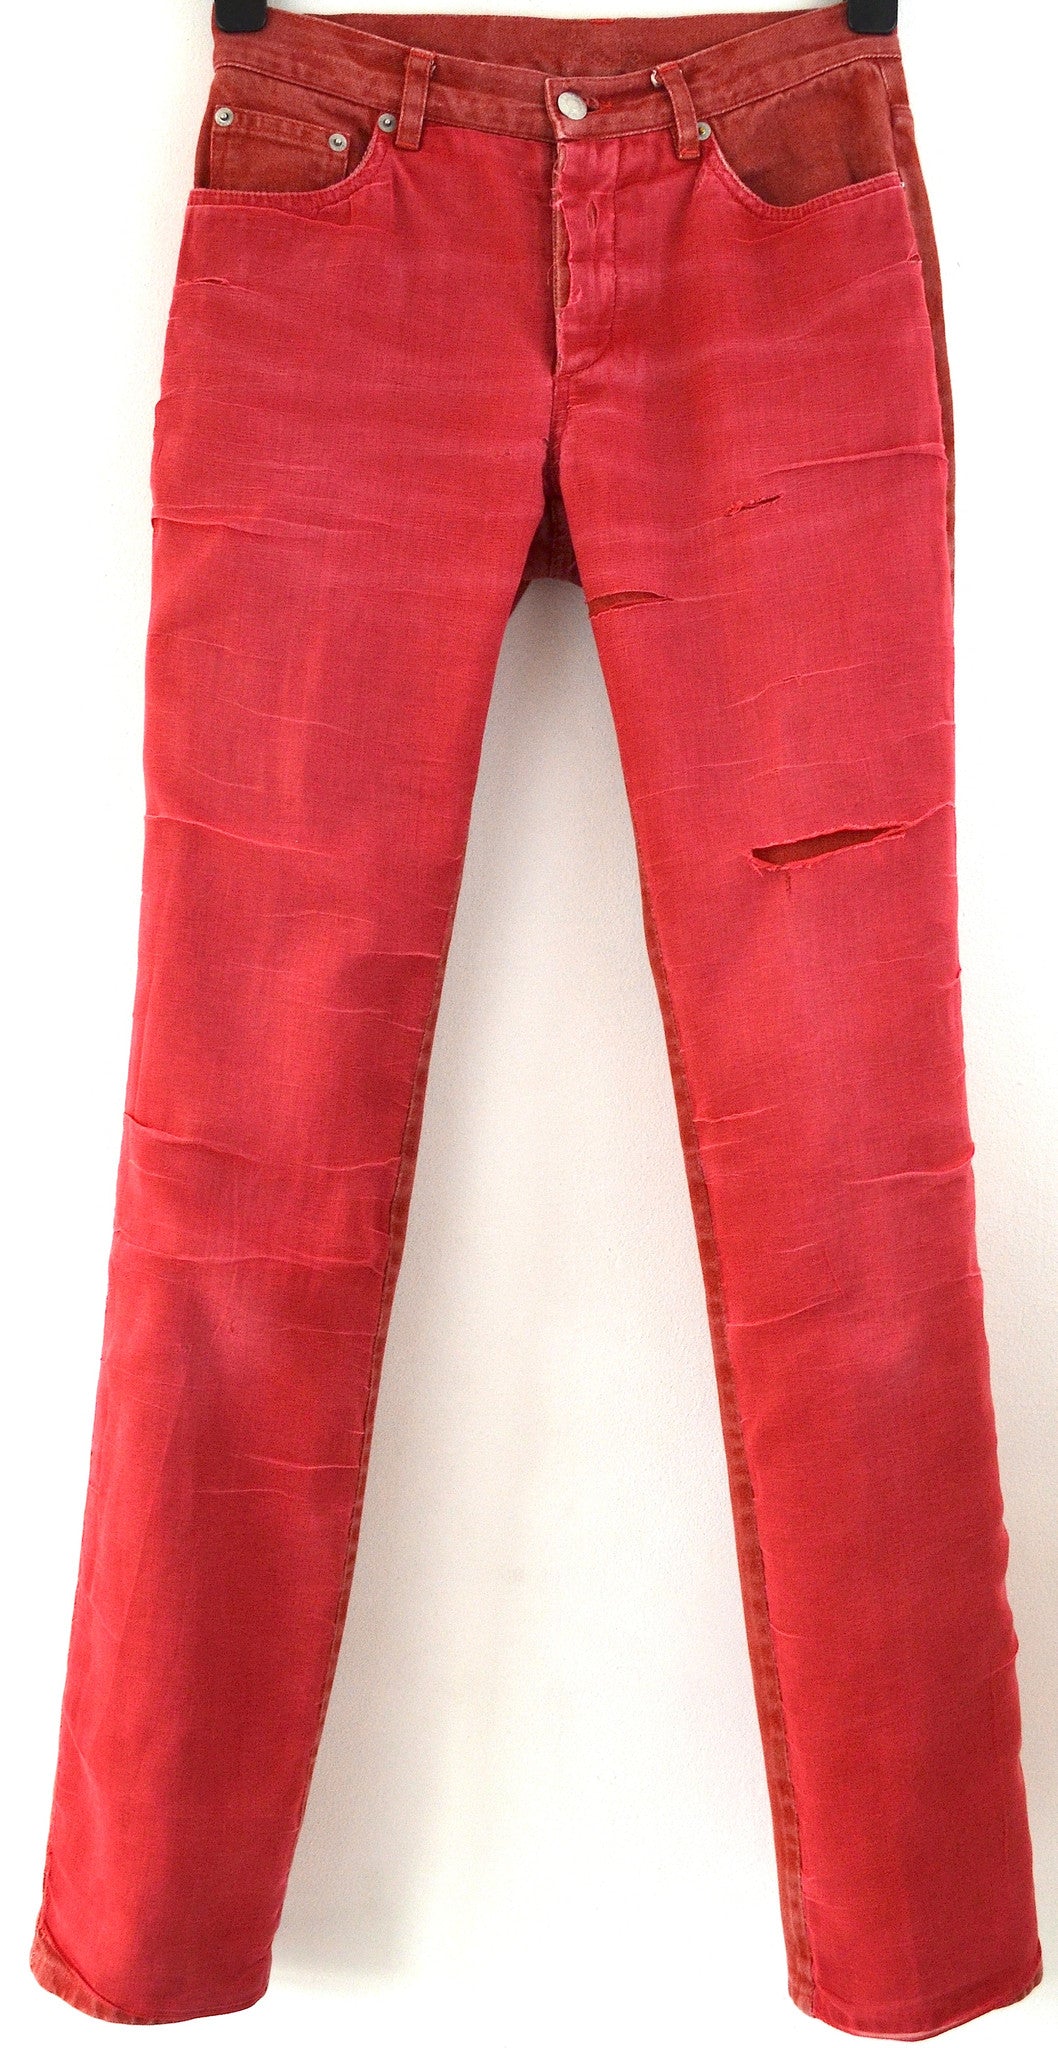 1997 Slim Jeans with Destroyed Silk Chiffon Layers